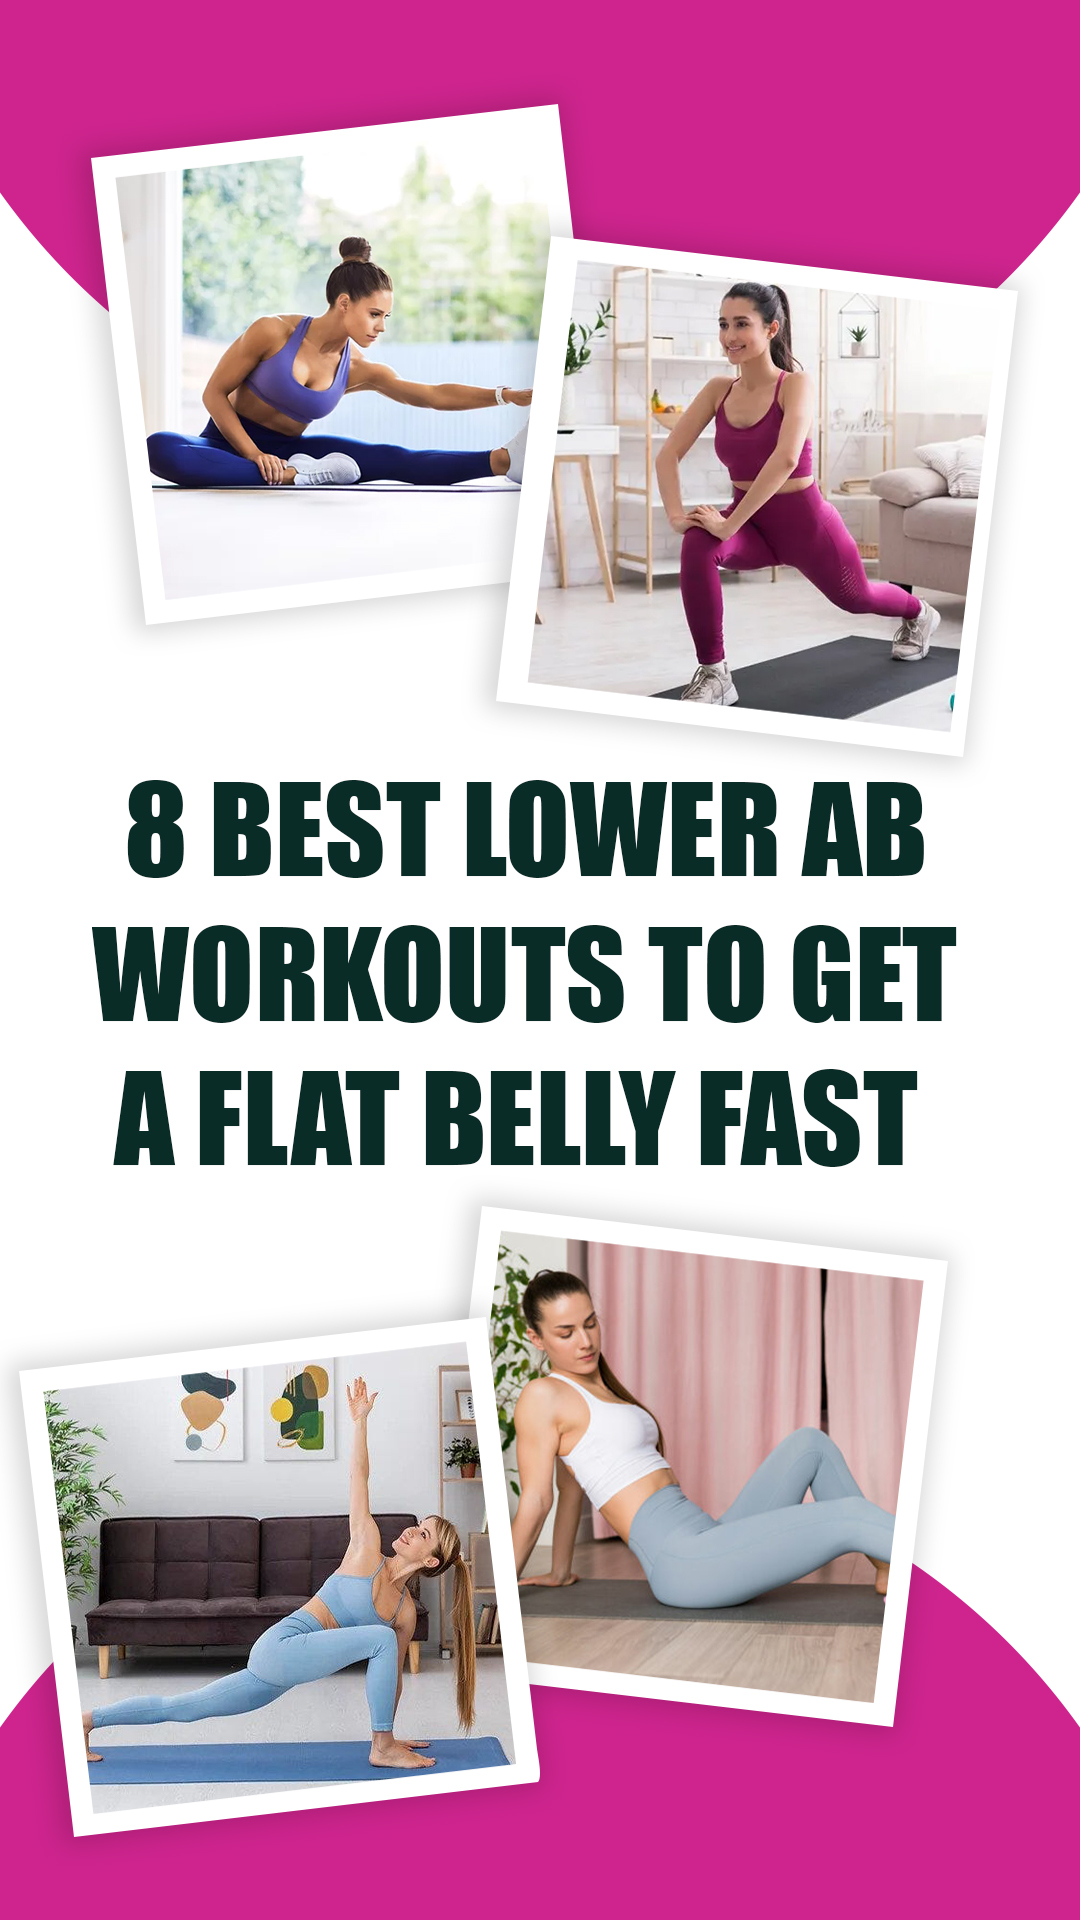 8 Best Lower Ab Workouts for Women To Get A Flat Belly